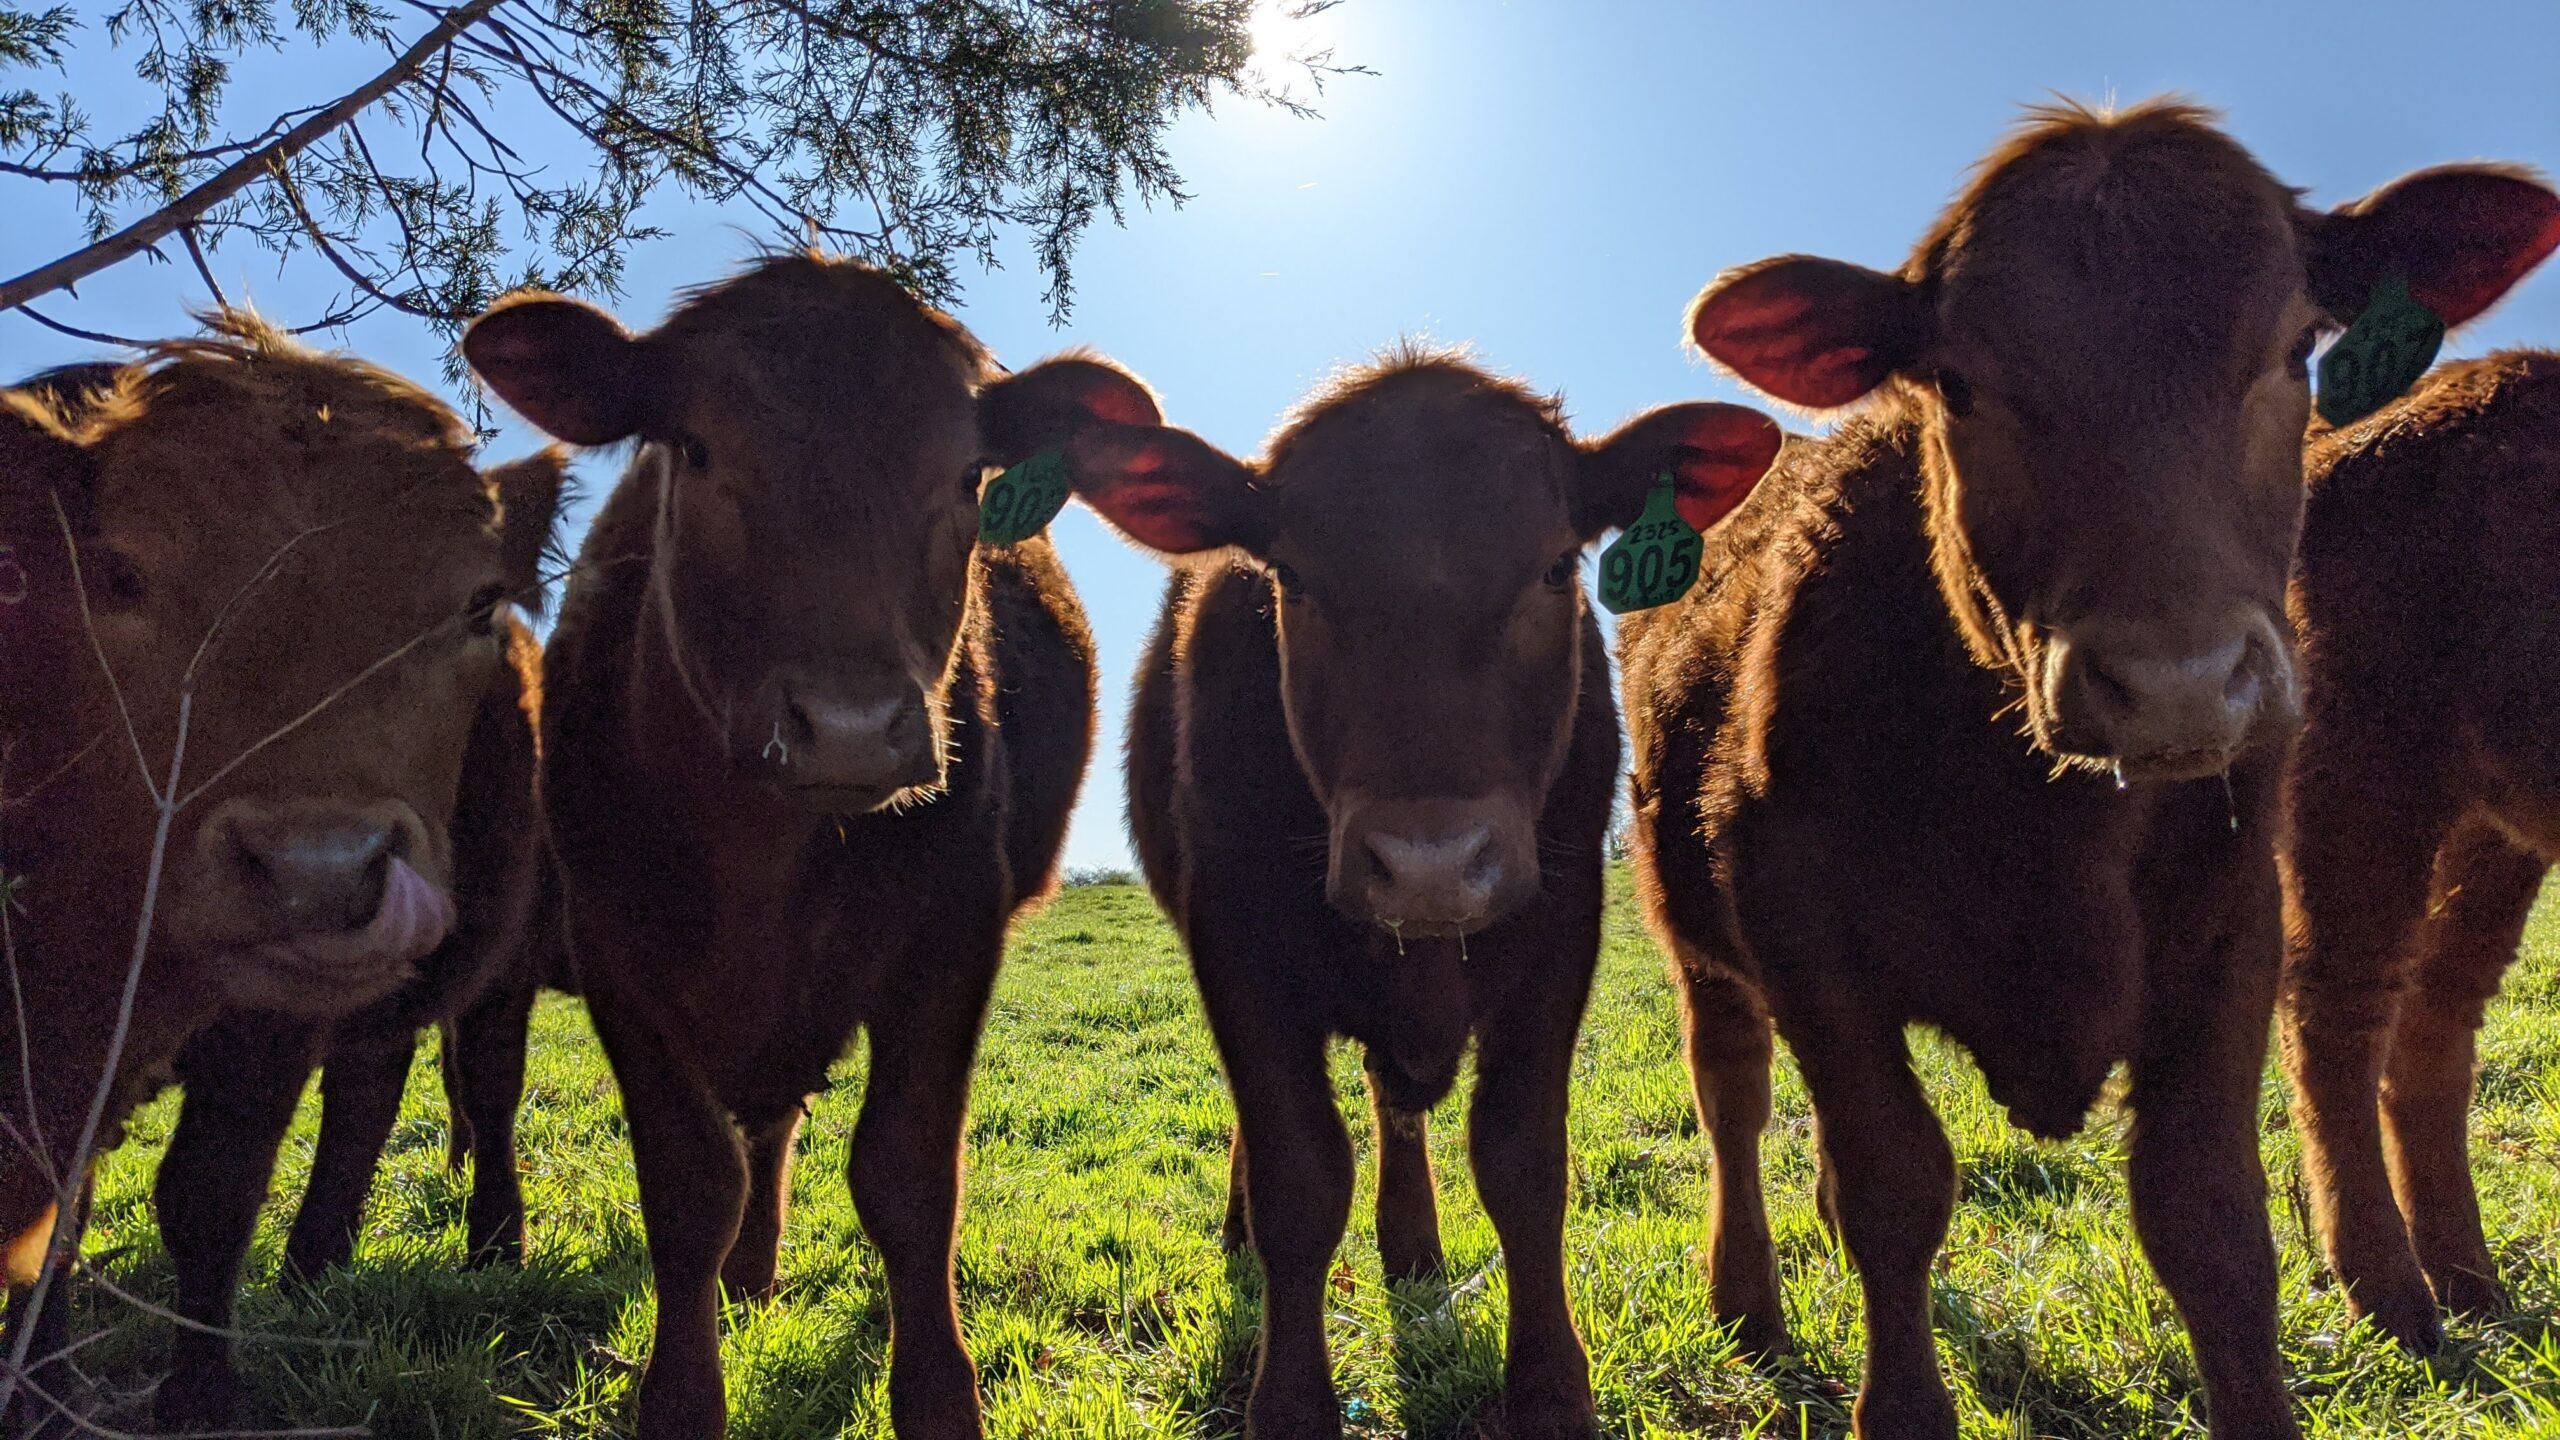 Picture of four cows staring at the camera in a grassy field.